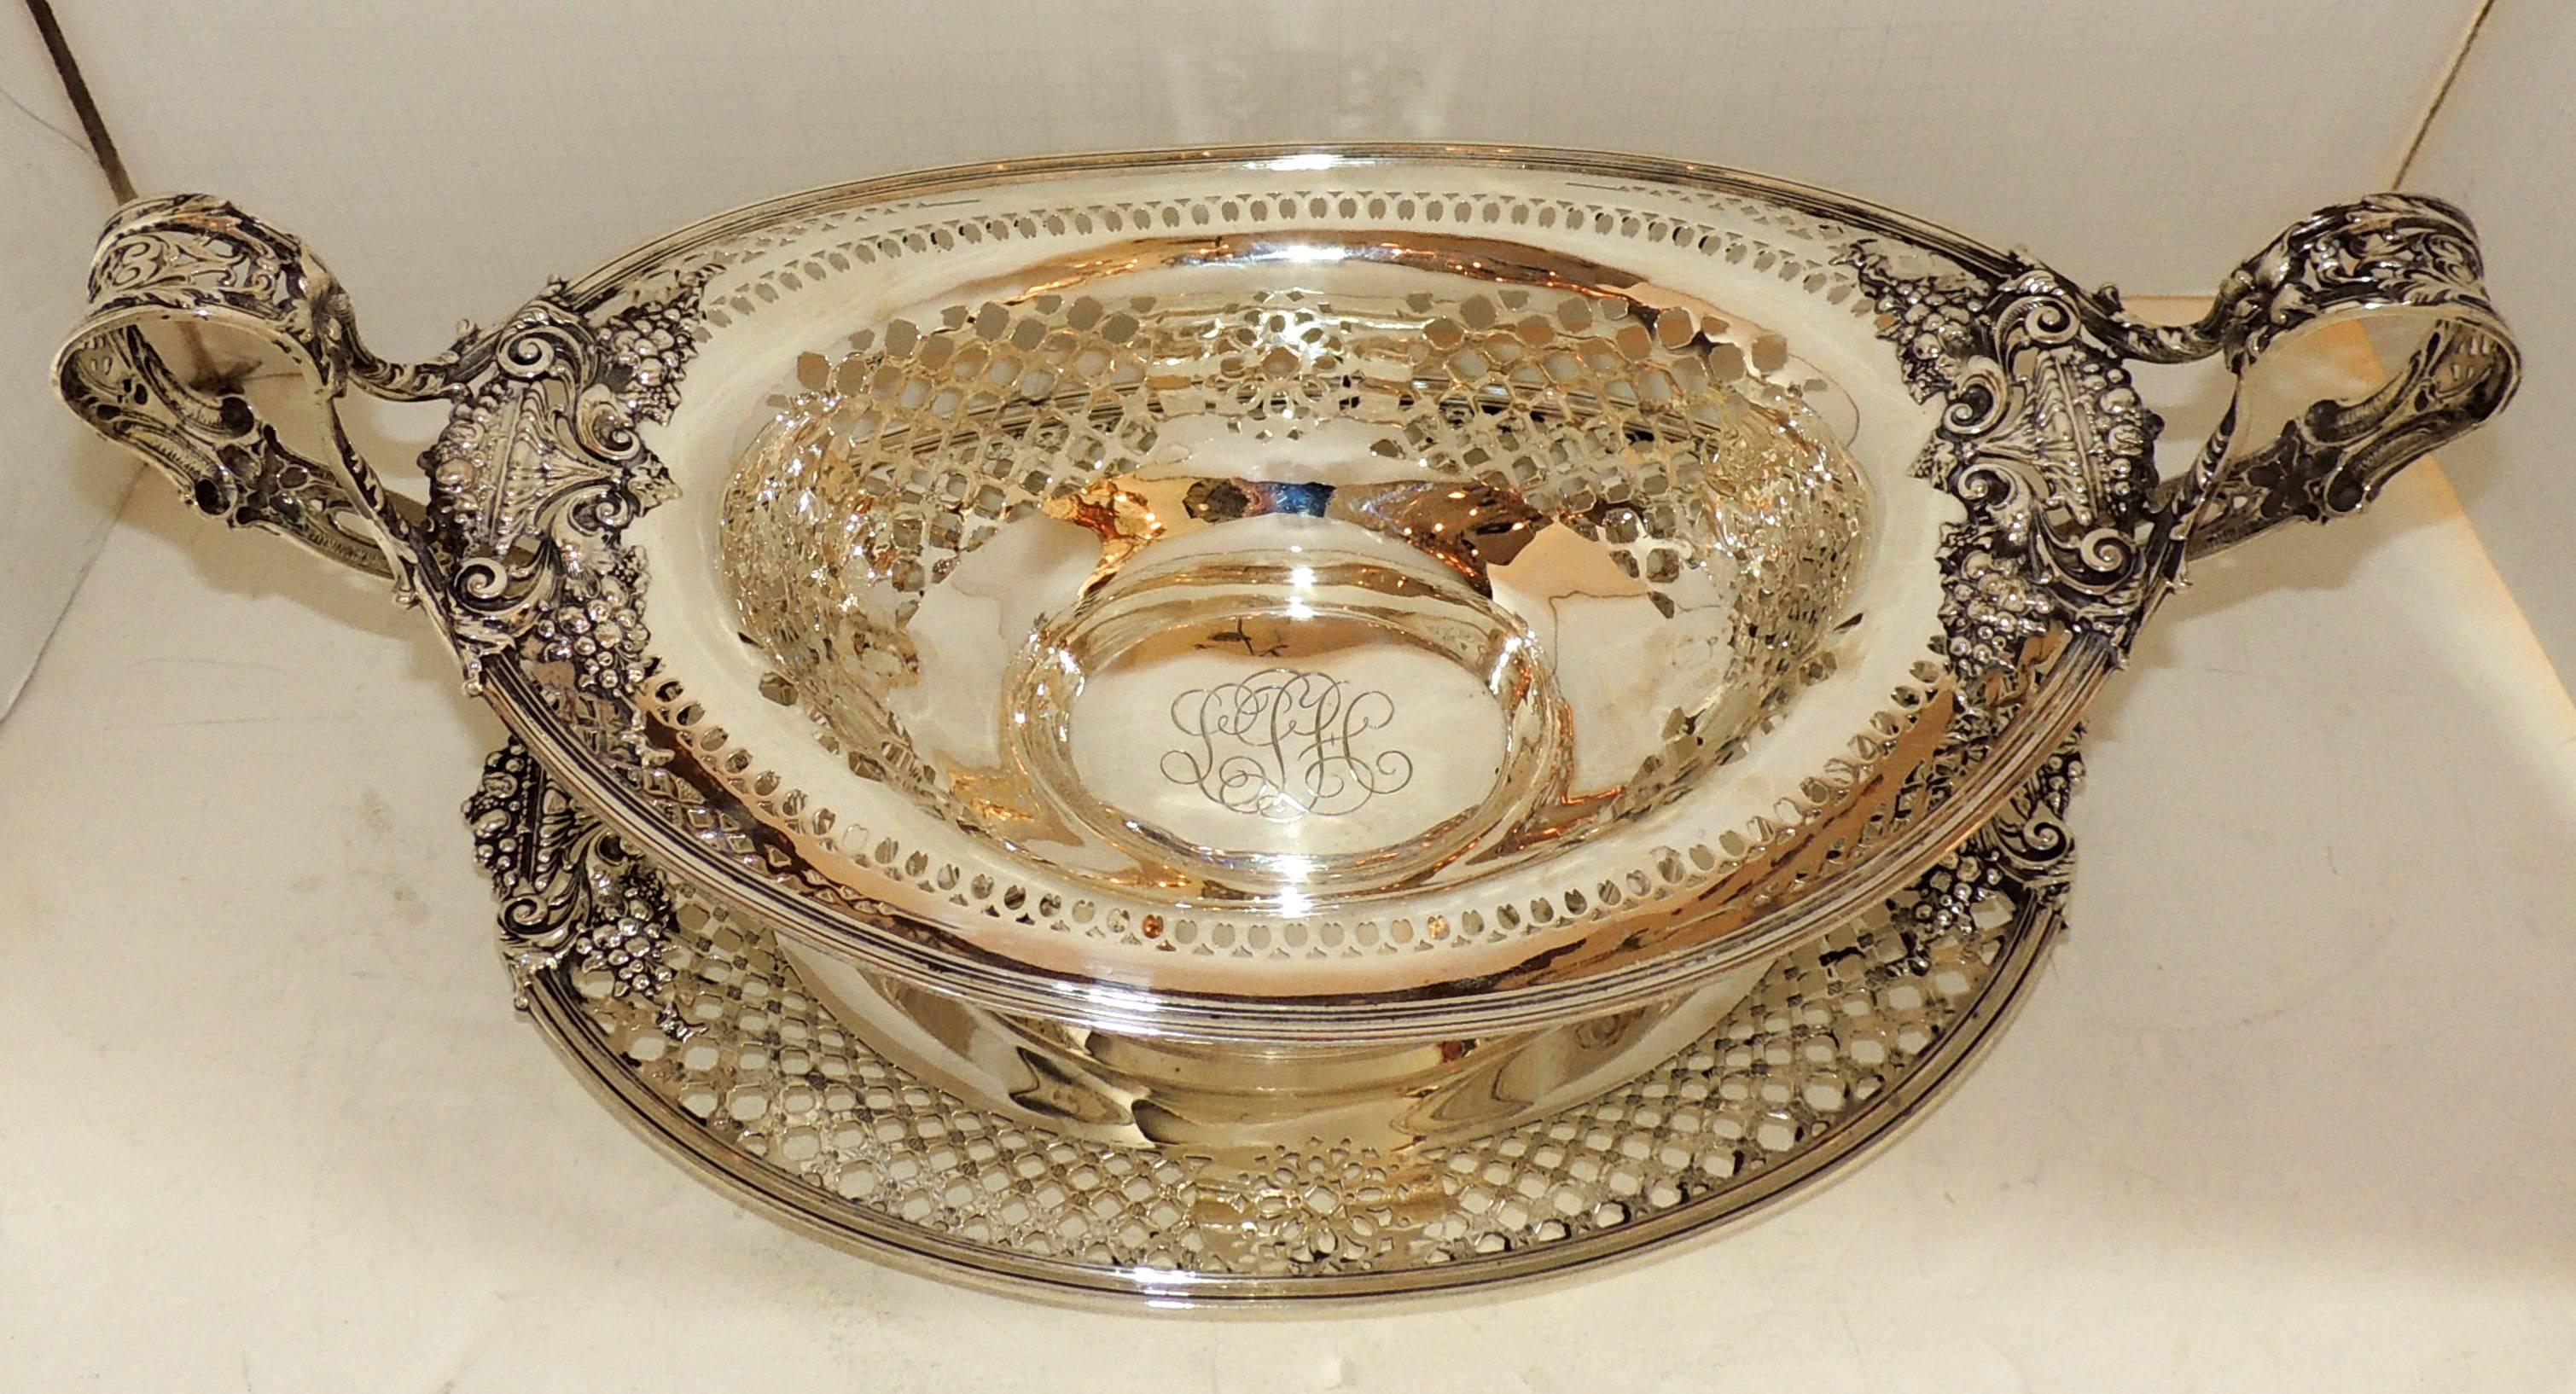 J.E. Caldwell & Co. Sterling Silver two-piece centerpiece with oval pierced handle bowl having urn and flower motif and matching under tray.
Centerpiece 9" D X 9 1/2" H X 20" W
Under plate 16" W X 10 !/2" D X 1" H.